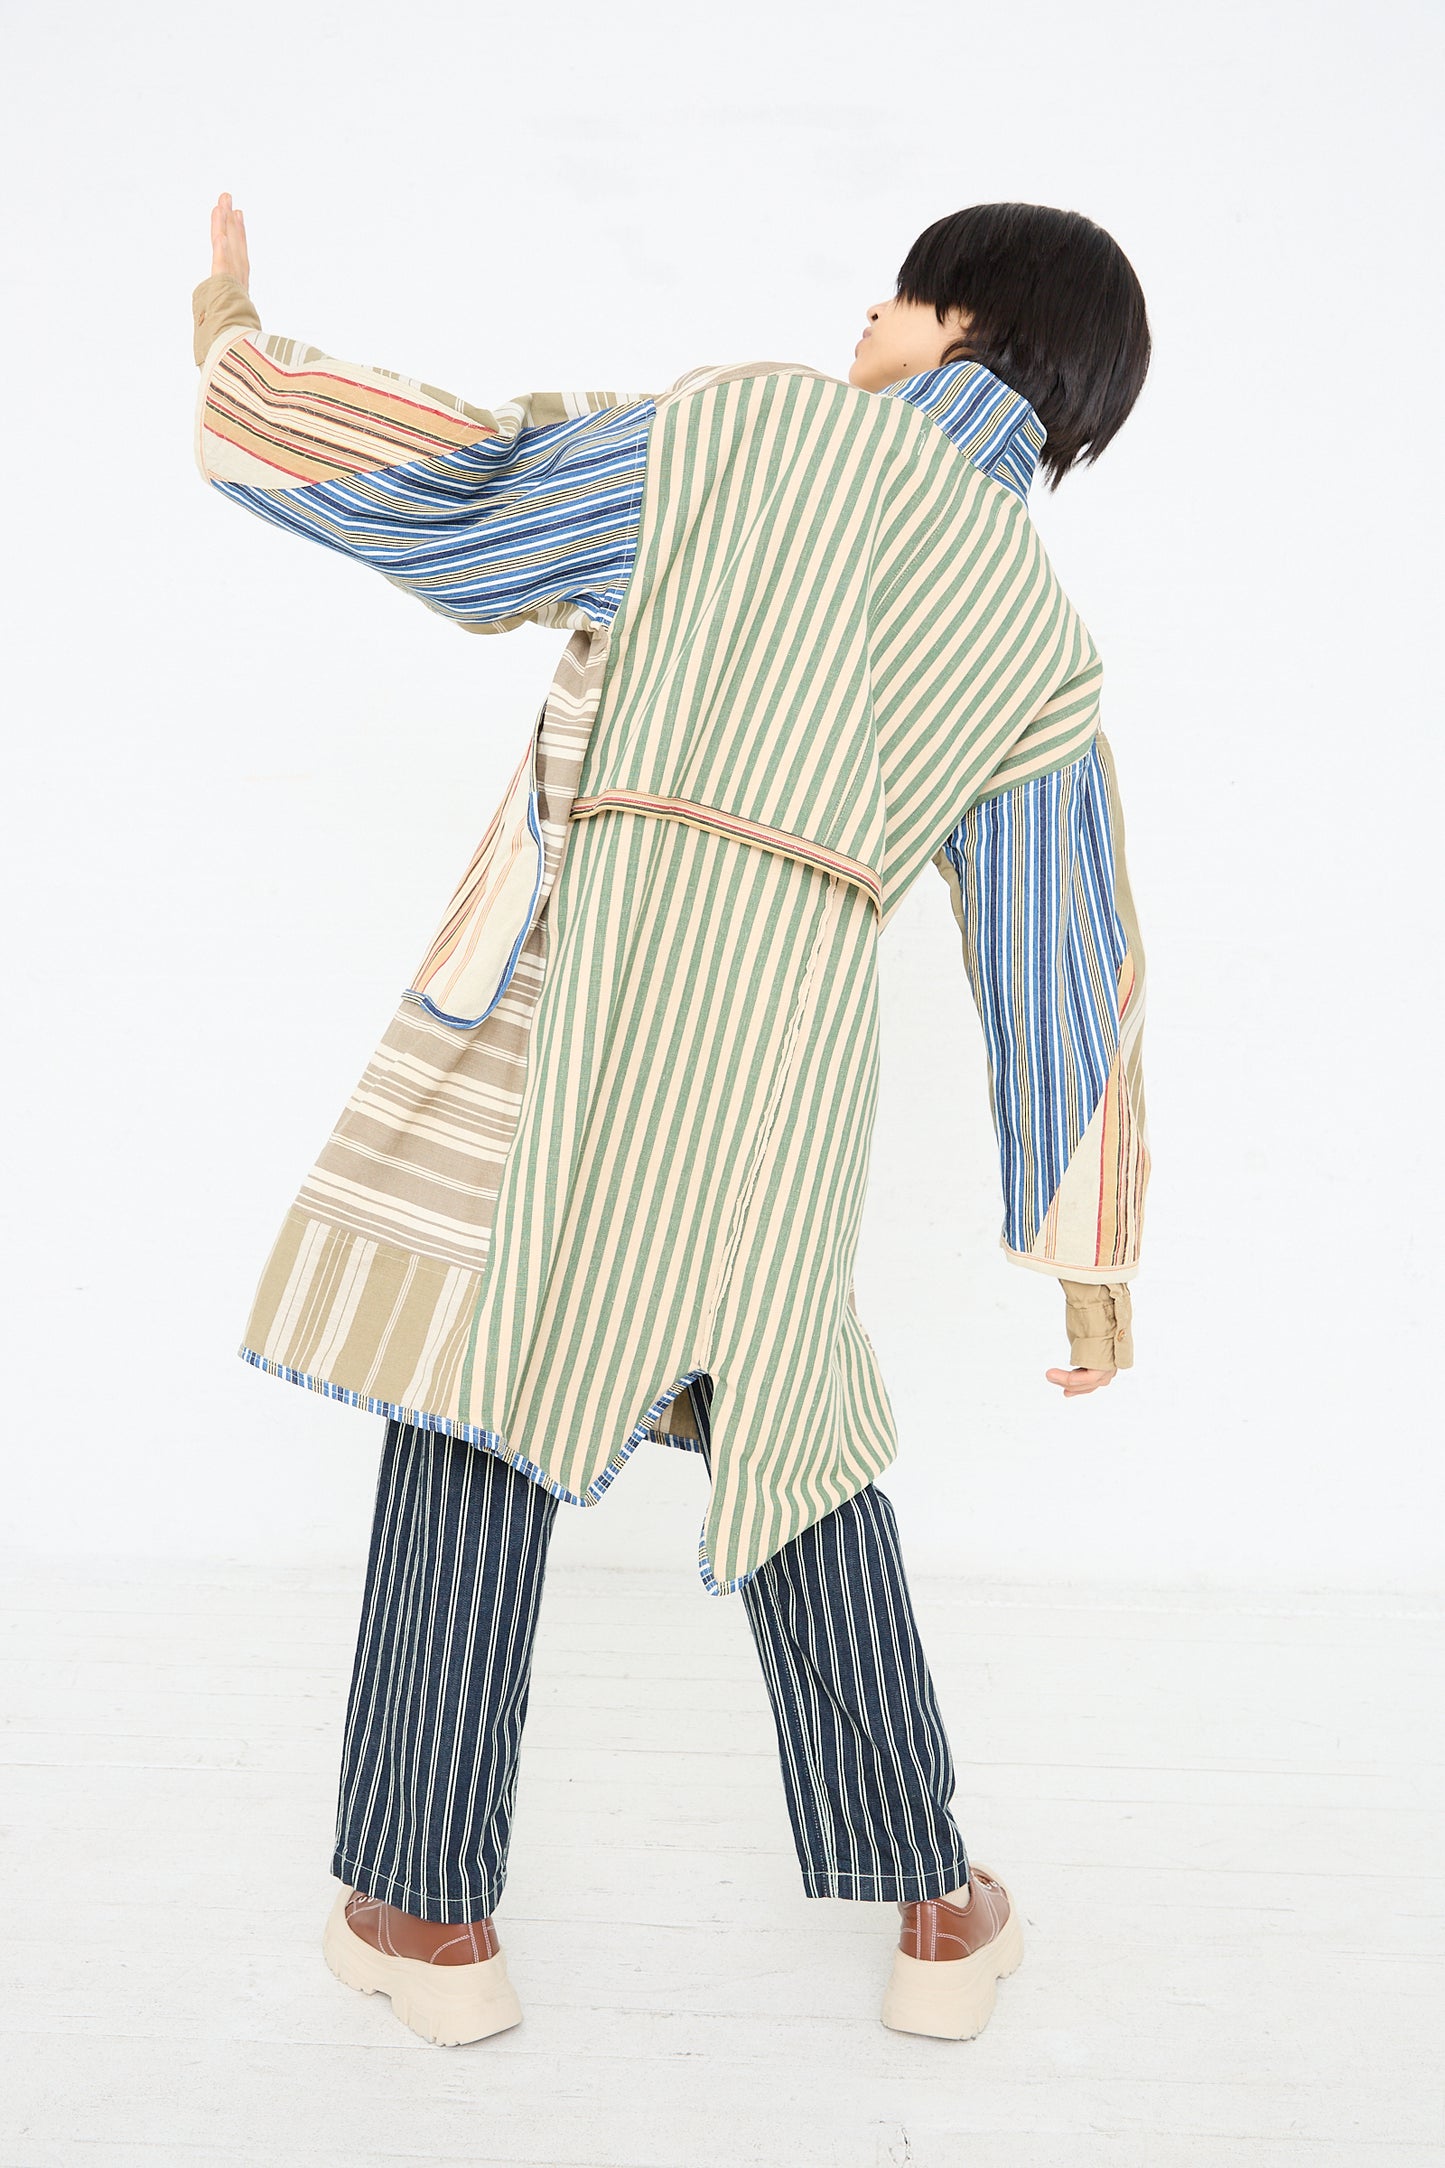 A person wearing a Thank You Have A Good Day Patchwork French Ticking Fishtail Parka with an avant-garde design poses with their back to the camera and one arm extended upwards against a white background.